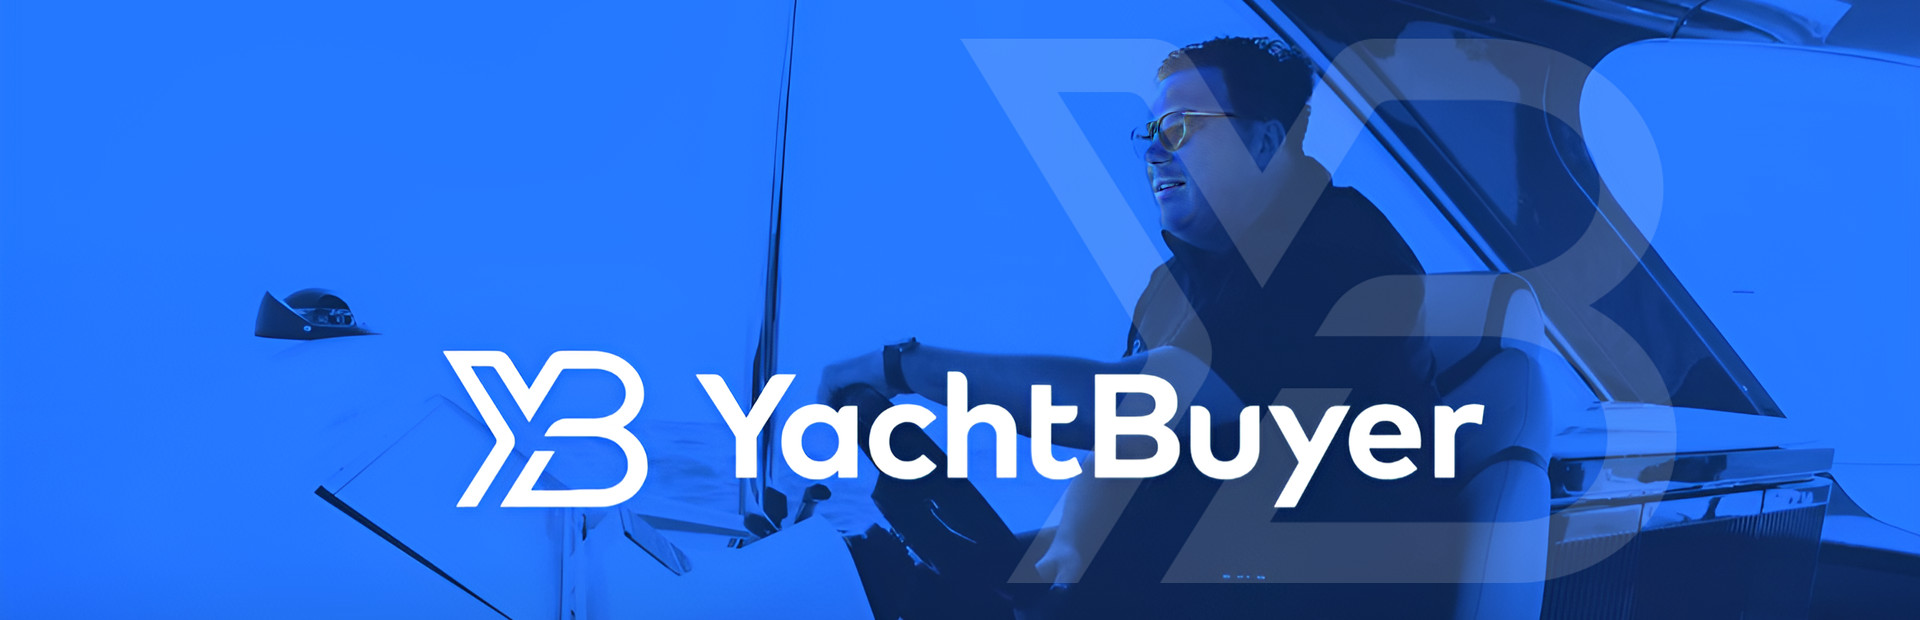 YachtBuyer Review Score Explained